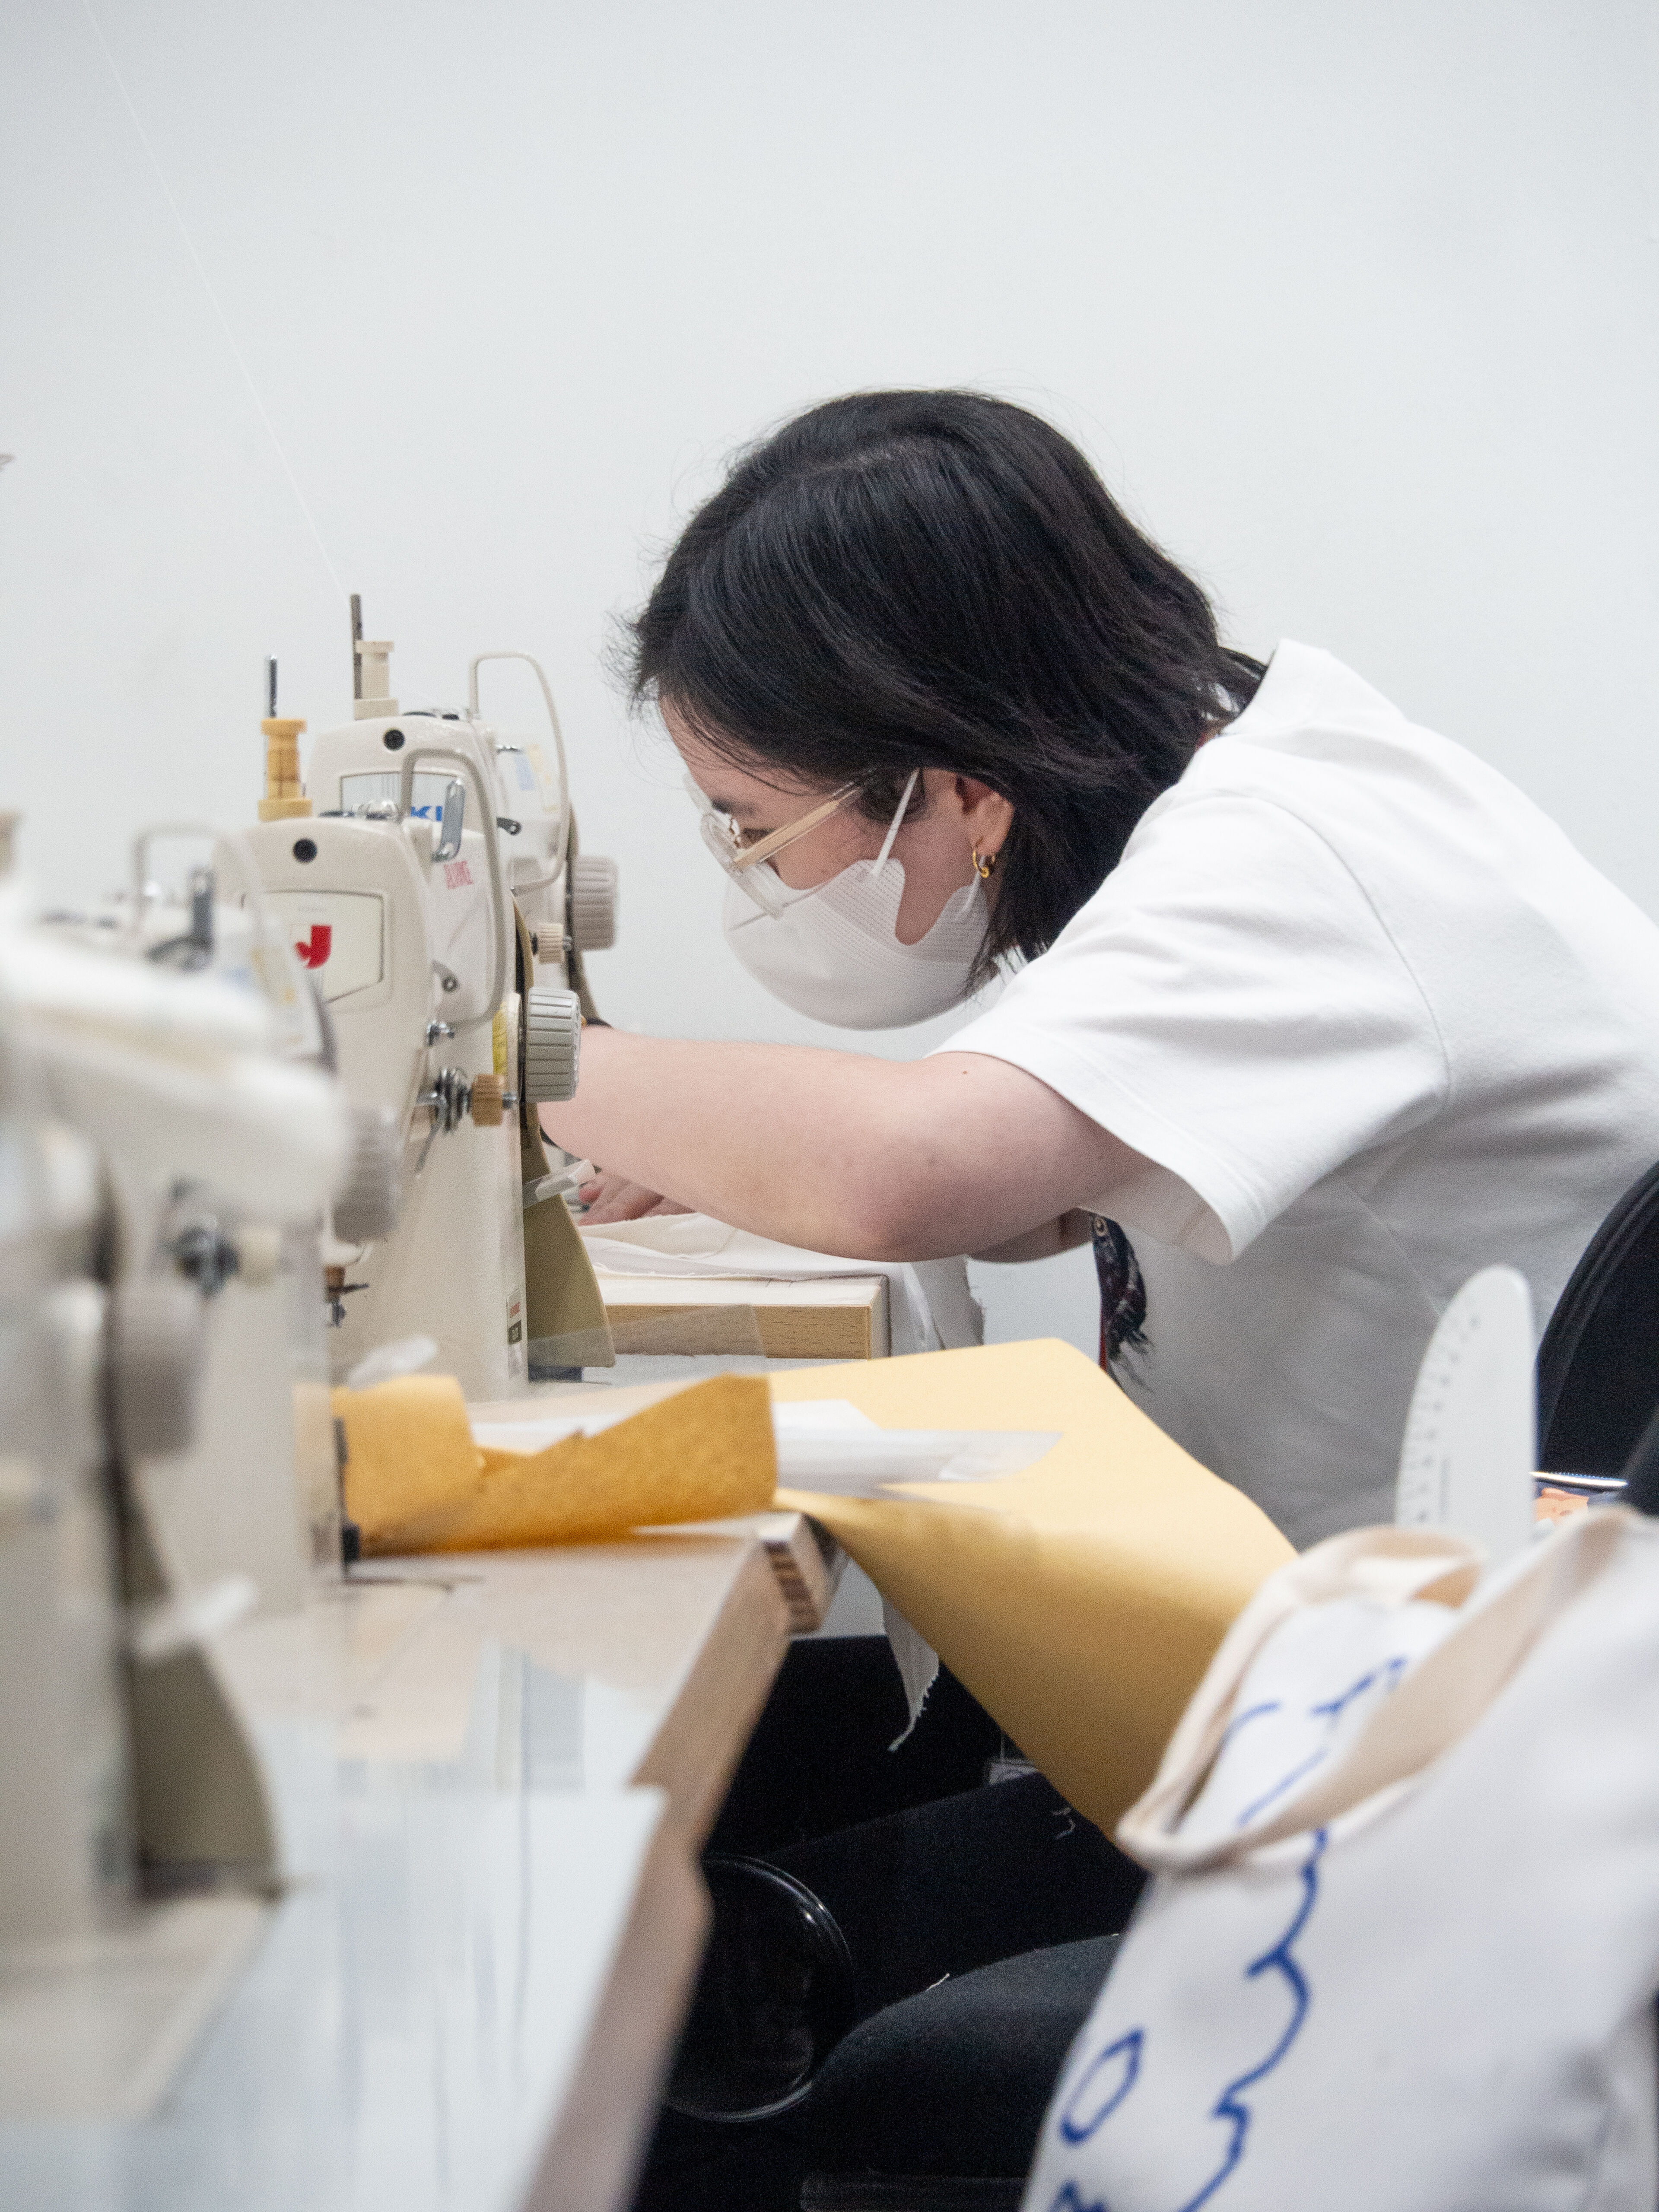 A focused tailor sewing with an industrial machine, fabric pieces on her workstation.